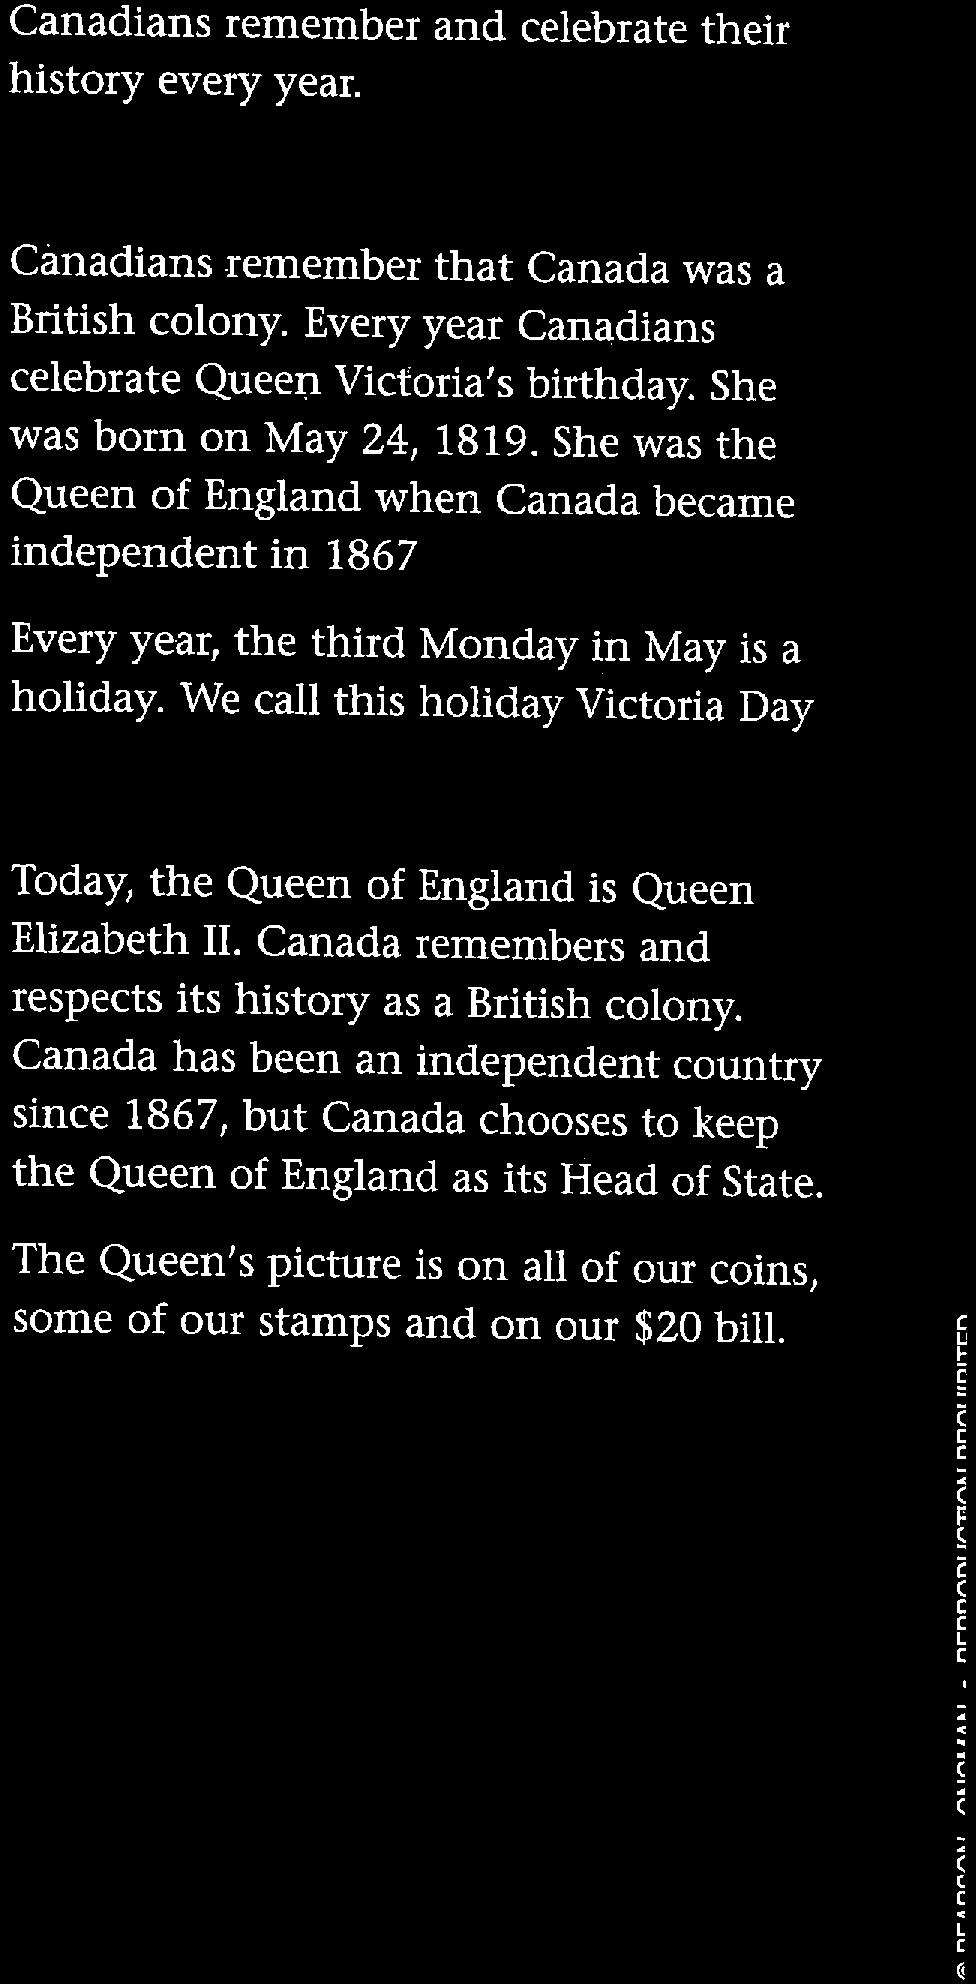 VICTORIA DAY Queen Elizabeth II Canadians remember and celebrate their history every year.